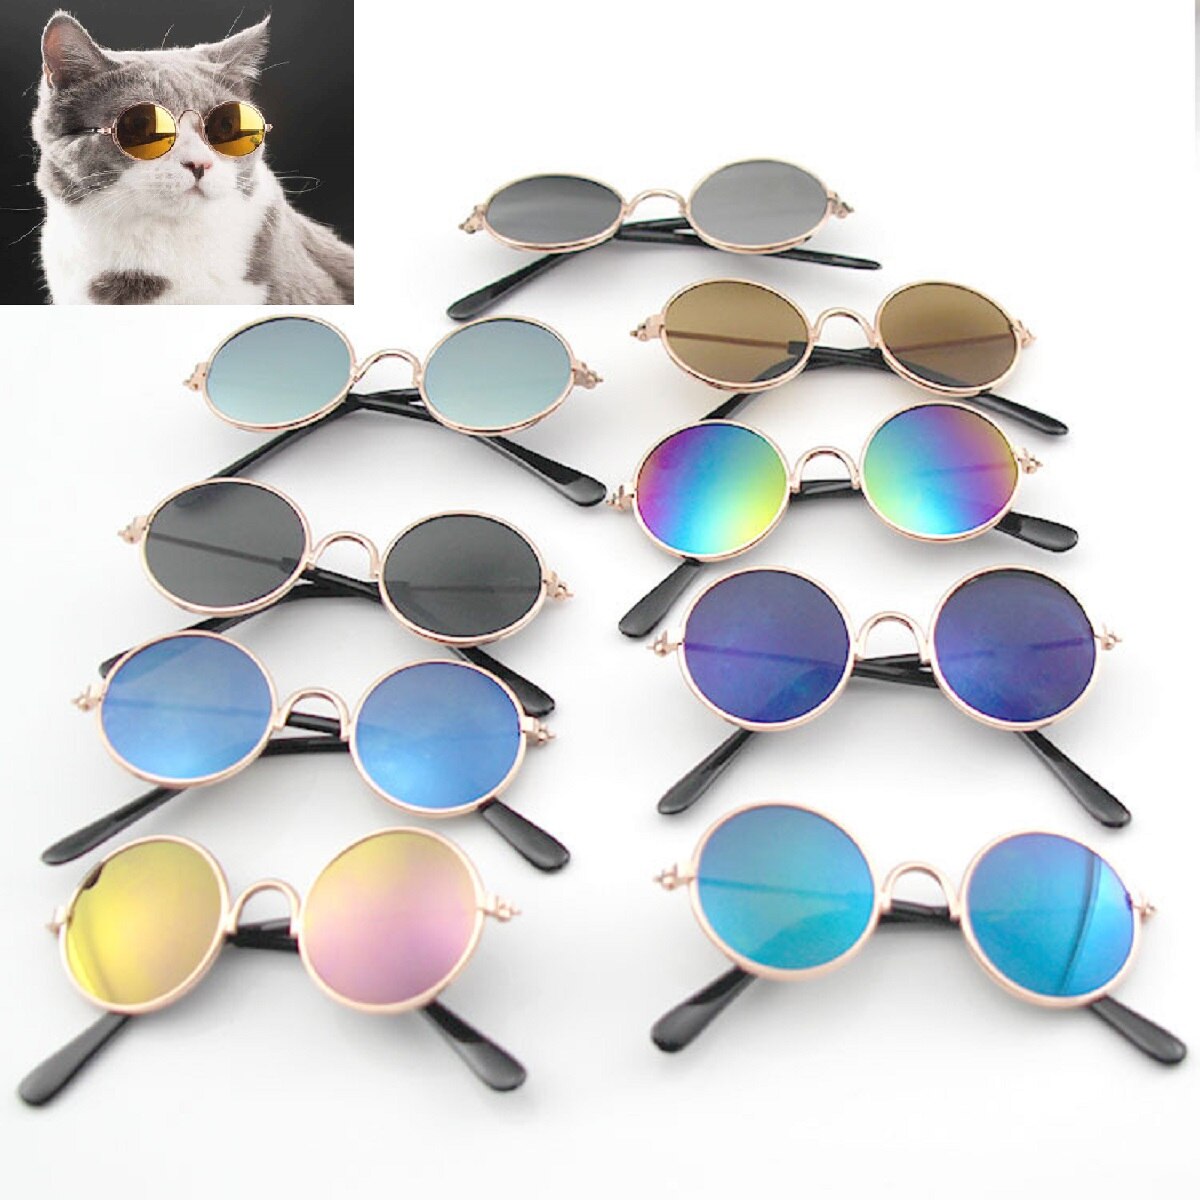 Reflection Eye wear glasses For Small Dog Cat